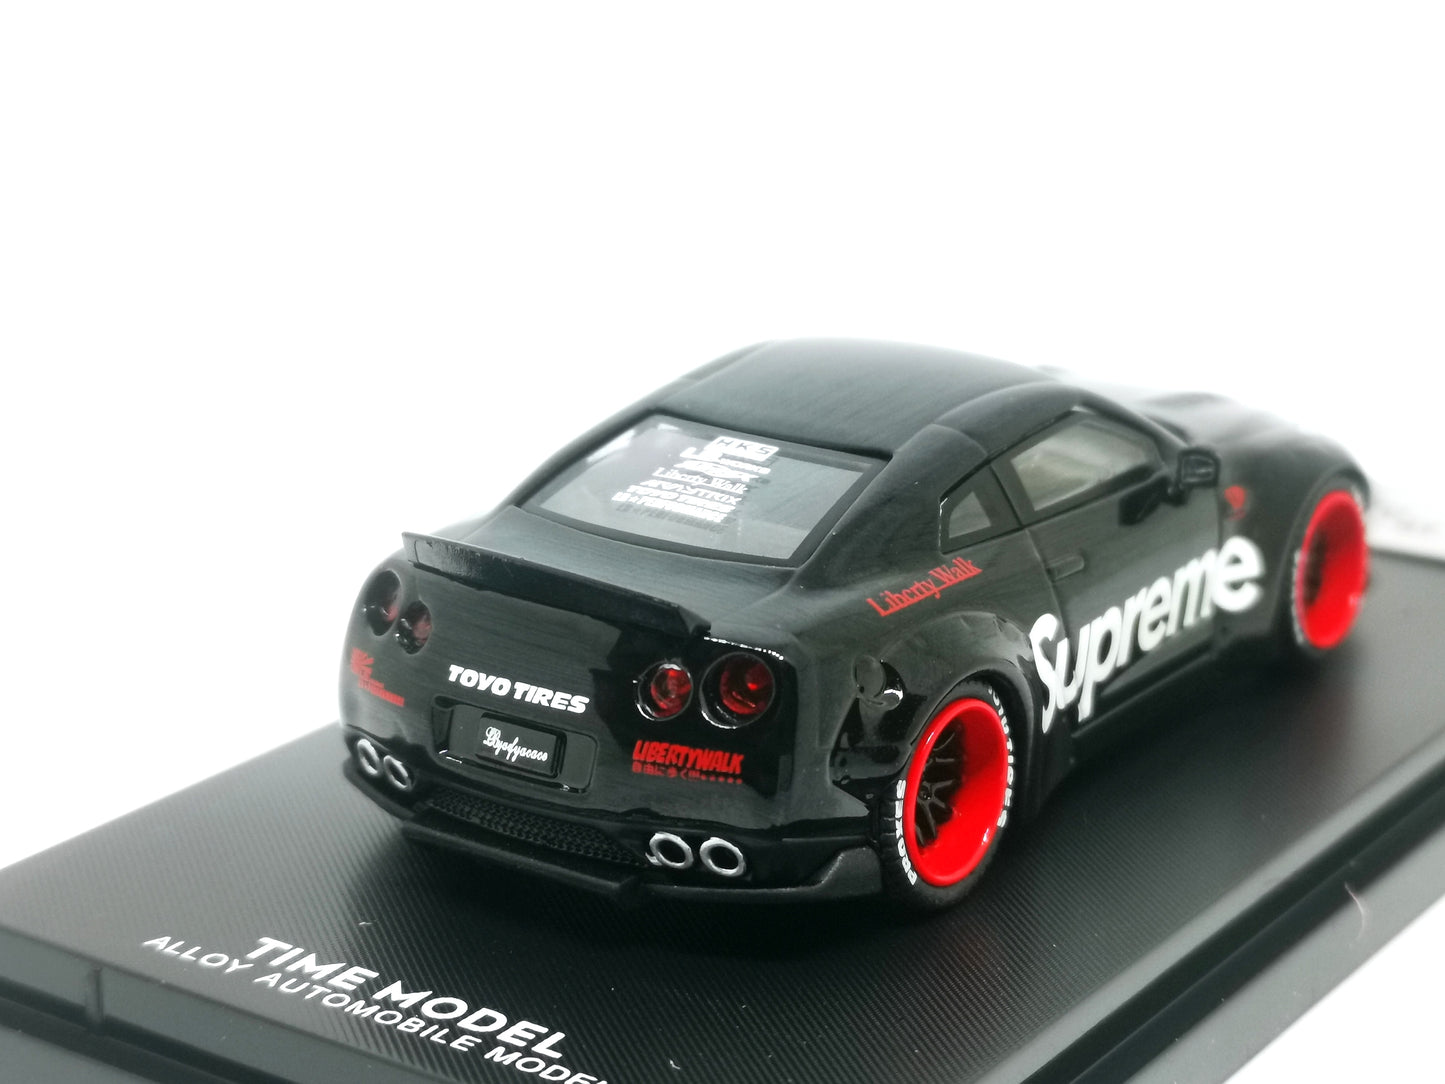 1/64 Time Model X WWDC Nissan GT-R  Indonesia exclusive Time Model